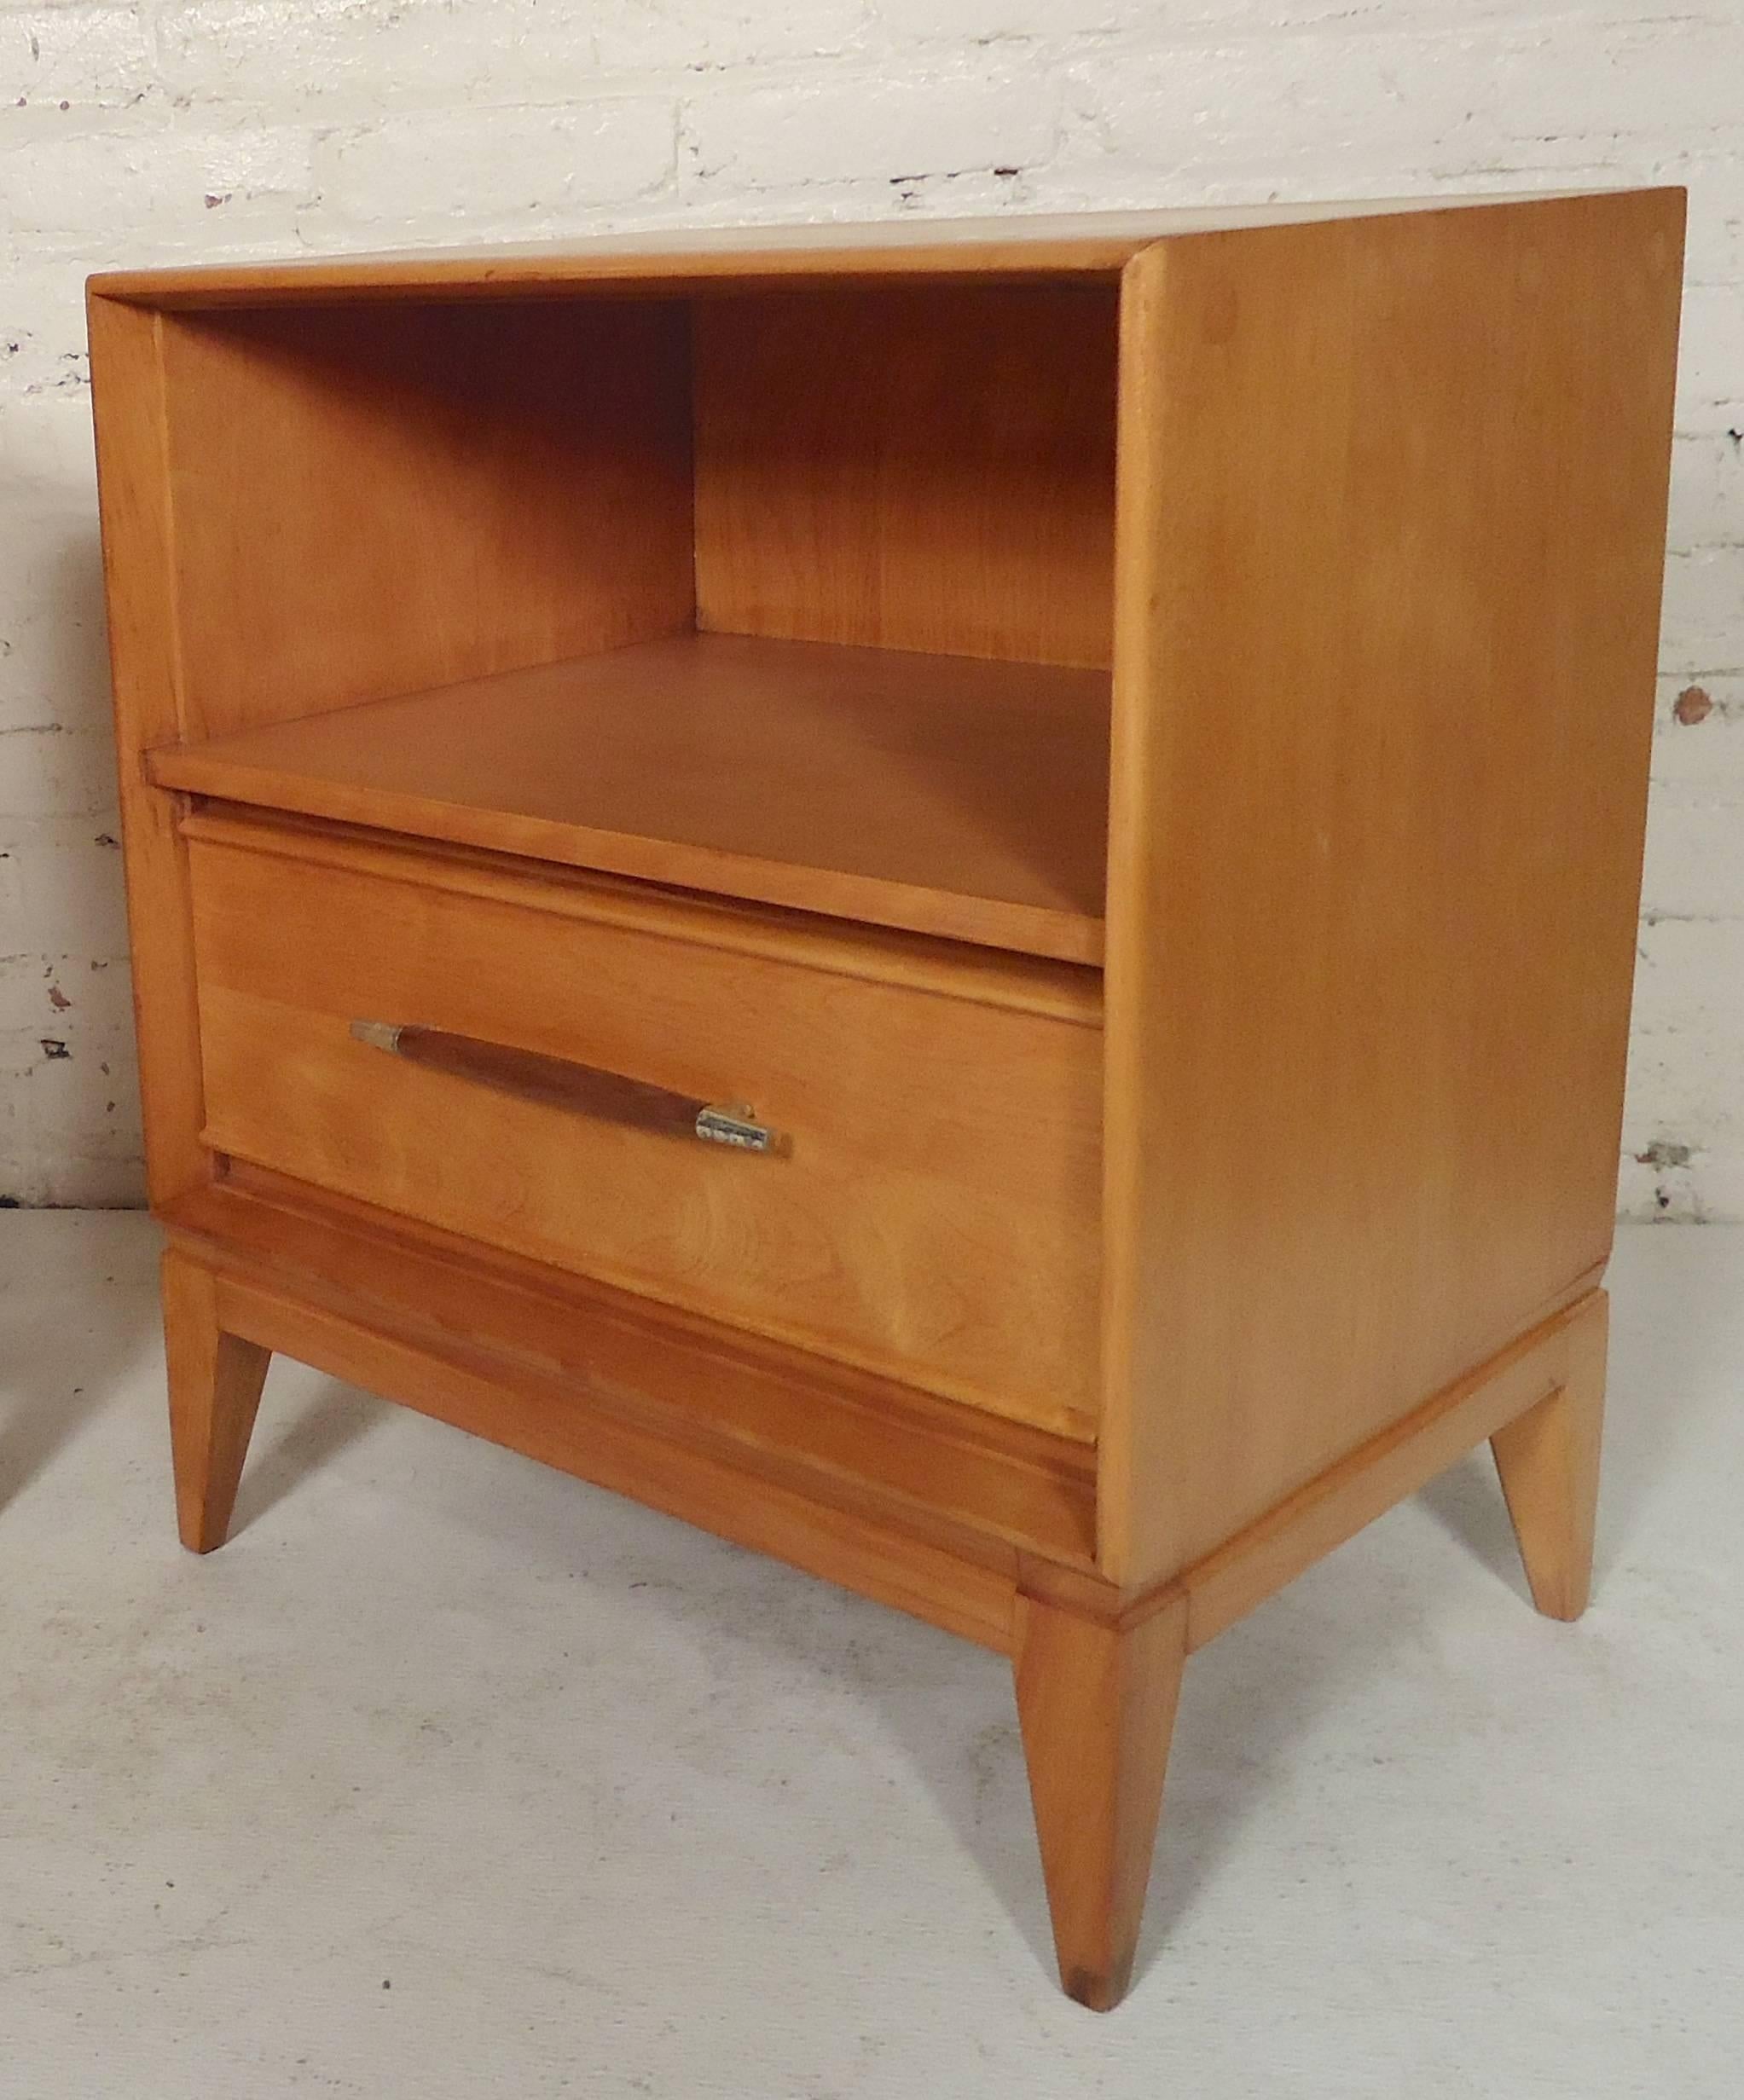 Bedside tables have an attractive curved front. Open shelf and bottom drawer.

Nightstands: 21